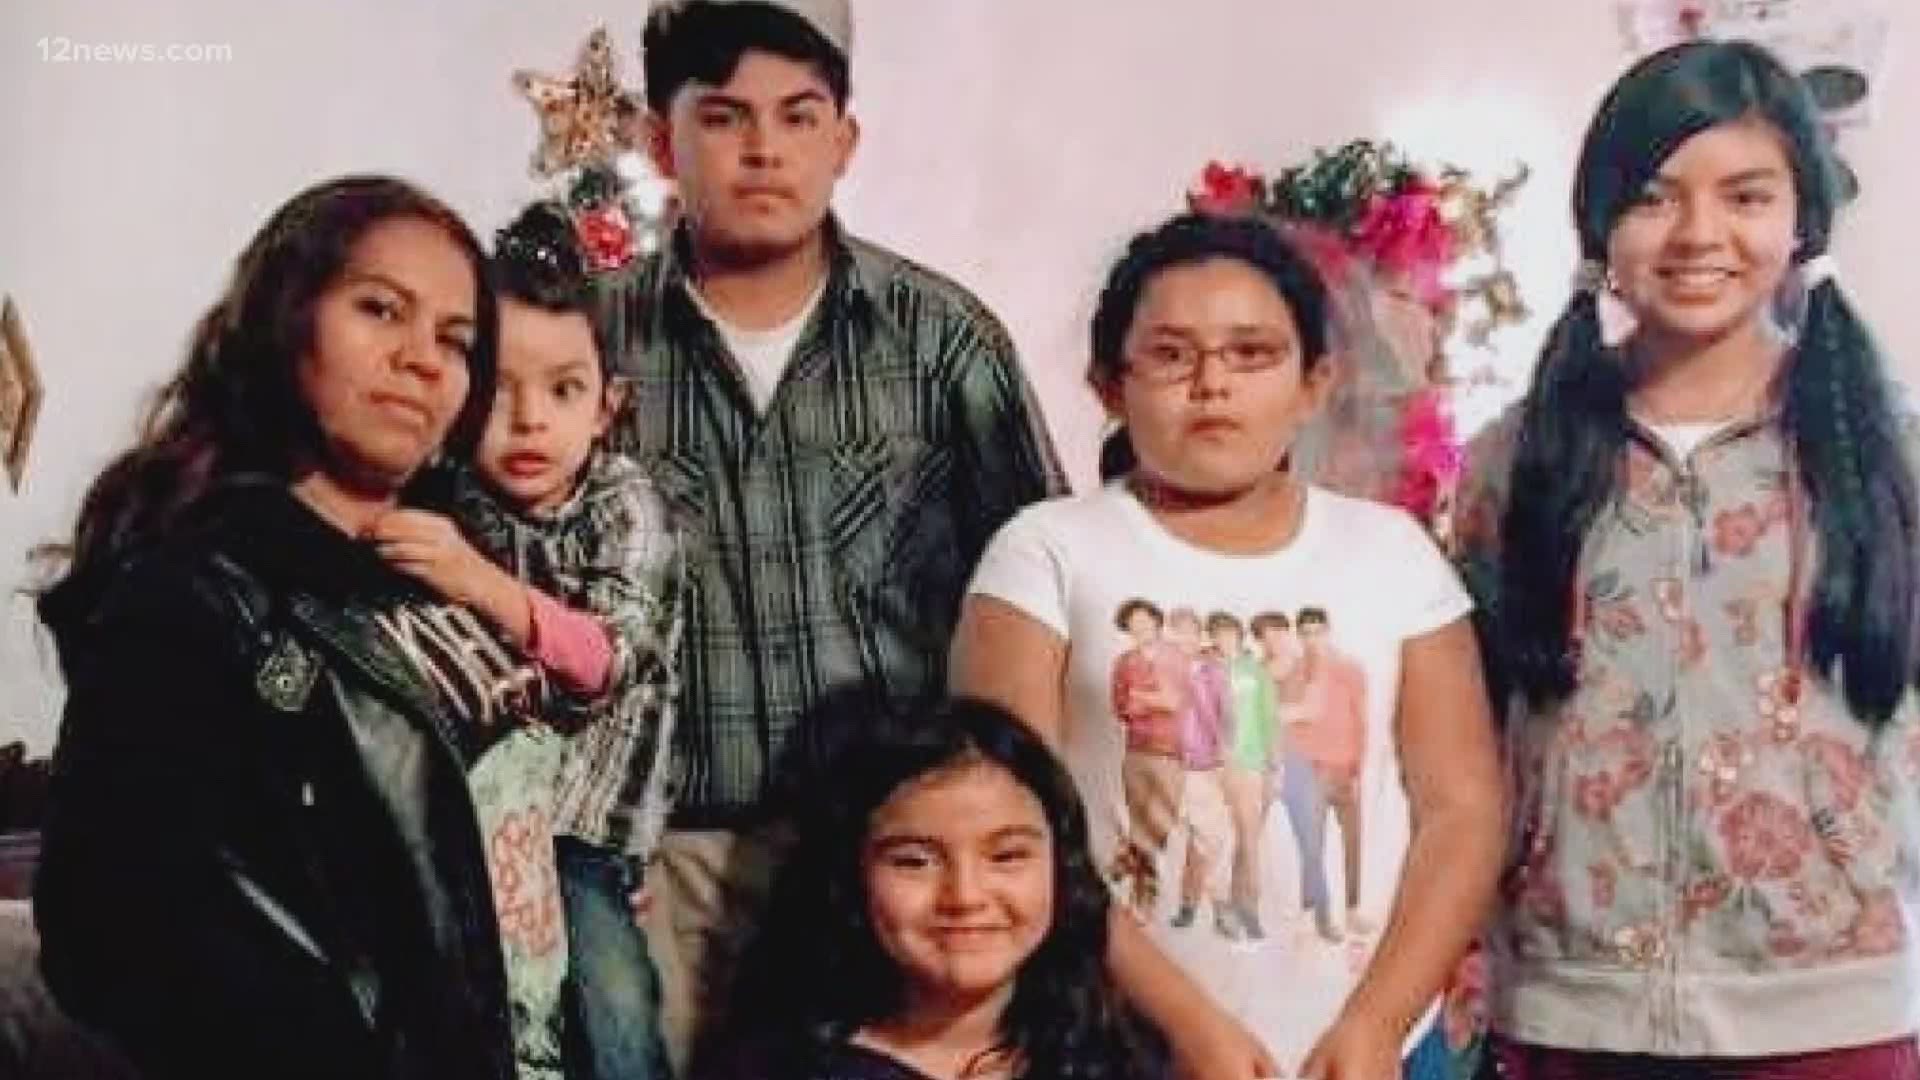 Yolanda and her five kids were evicted from their home during the pandemic for missing rent. But after 12 News viewers helped her, Yolanda decided to give back too.